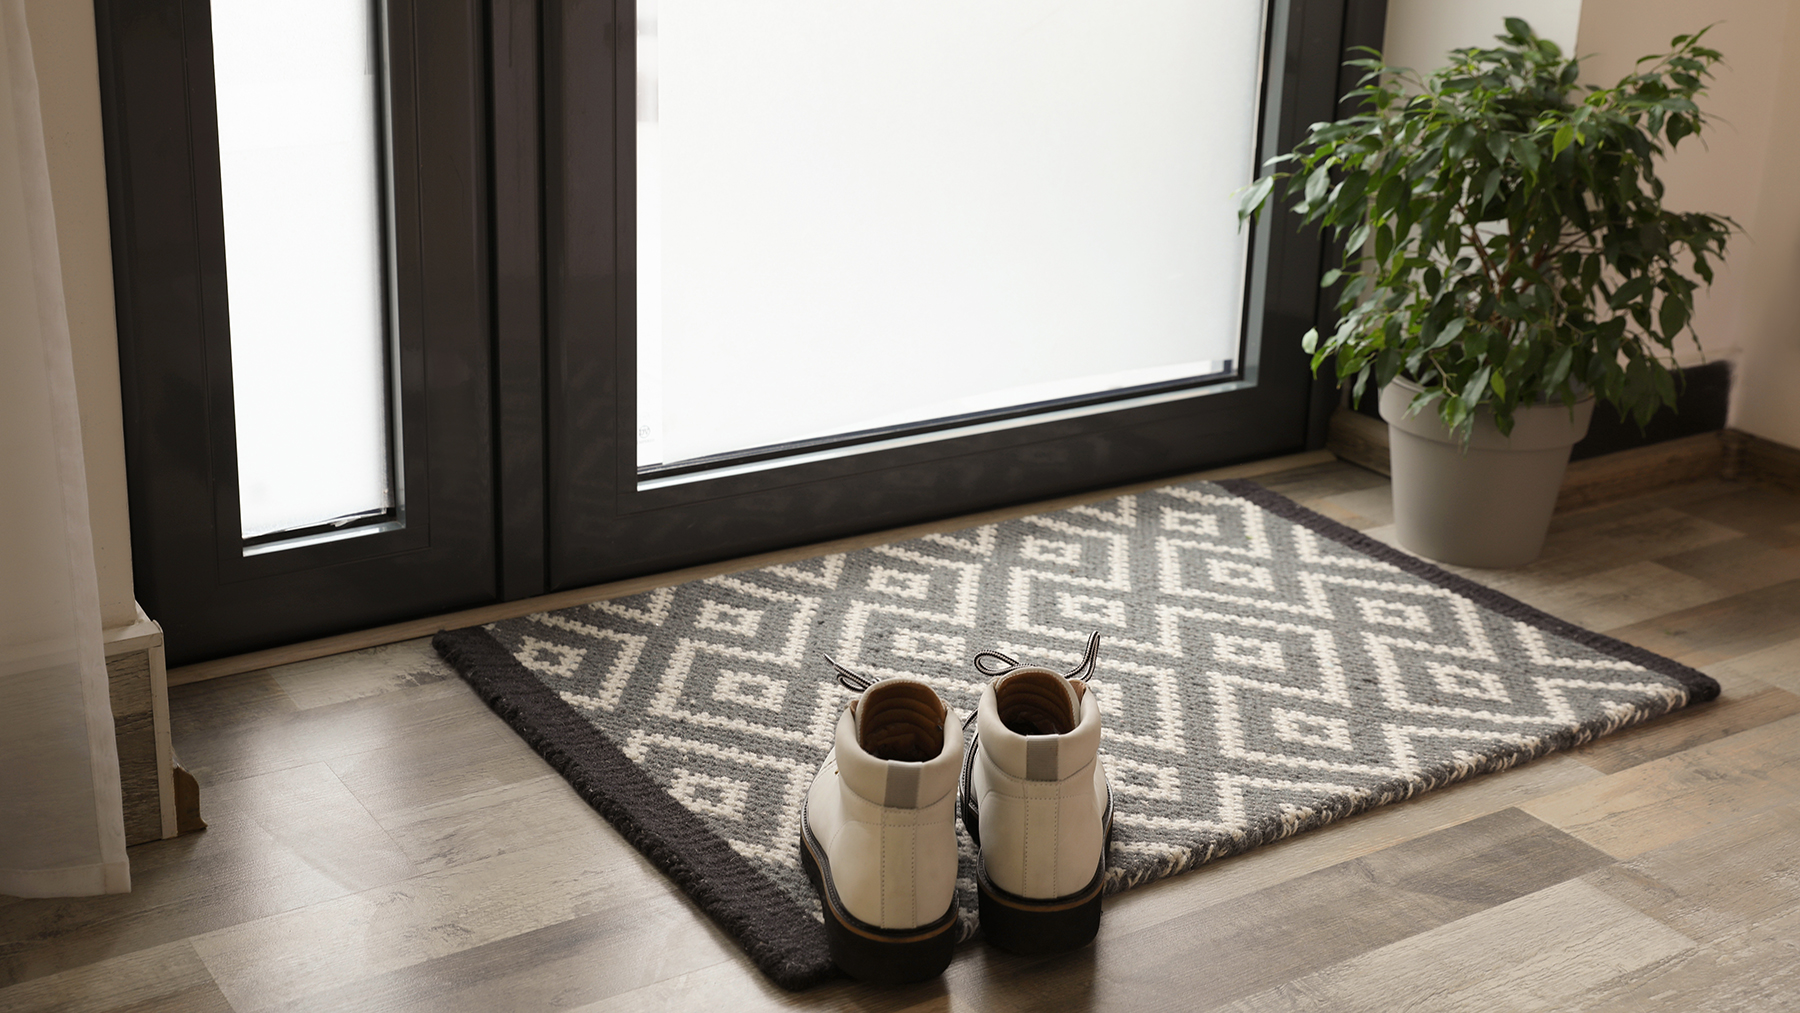 Shoes on patterned doormat in hallway